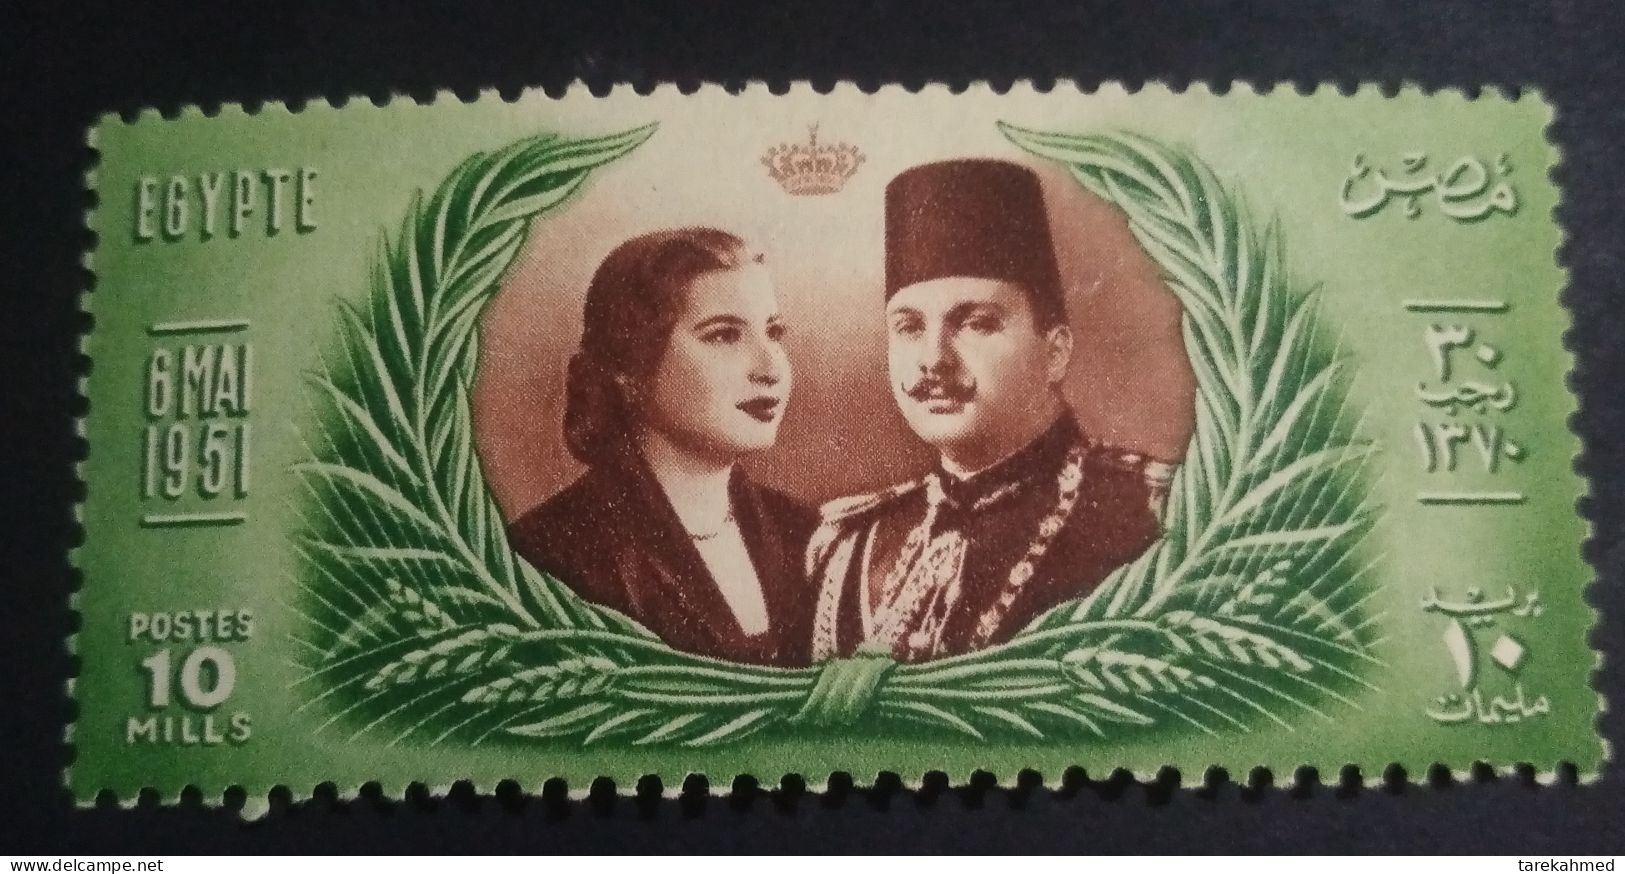 EGYPT 1951 , KING FAROUK & QUEEN NARRIMAN . ROYAL WEDDING , MNH , Watermark Crown And Letter Noon ن ، Original Gum - Neufs